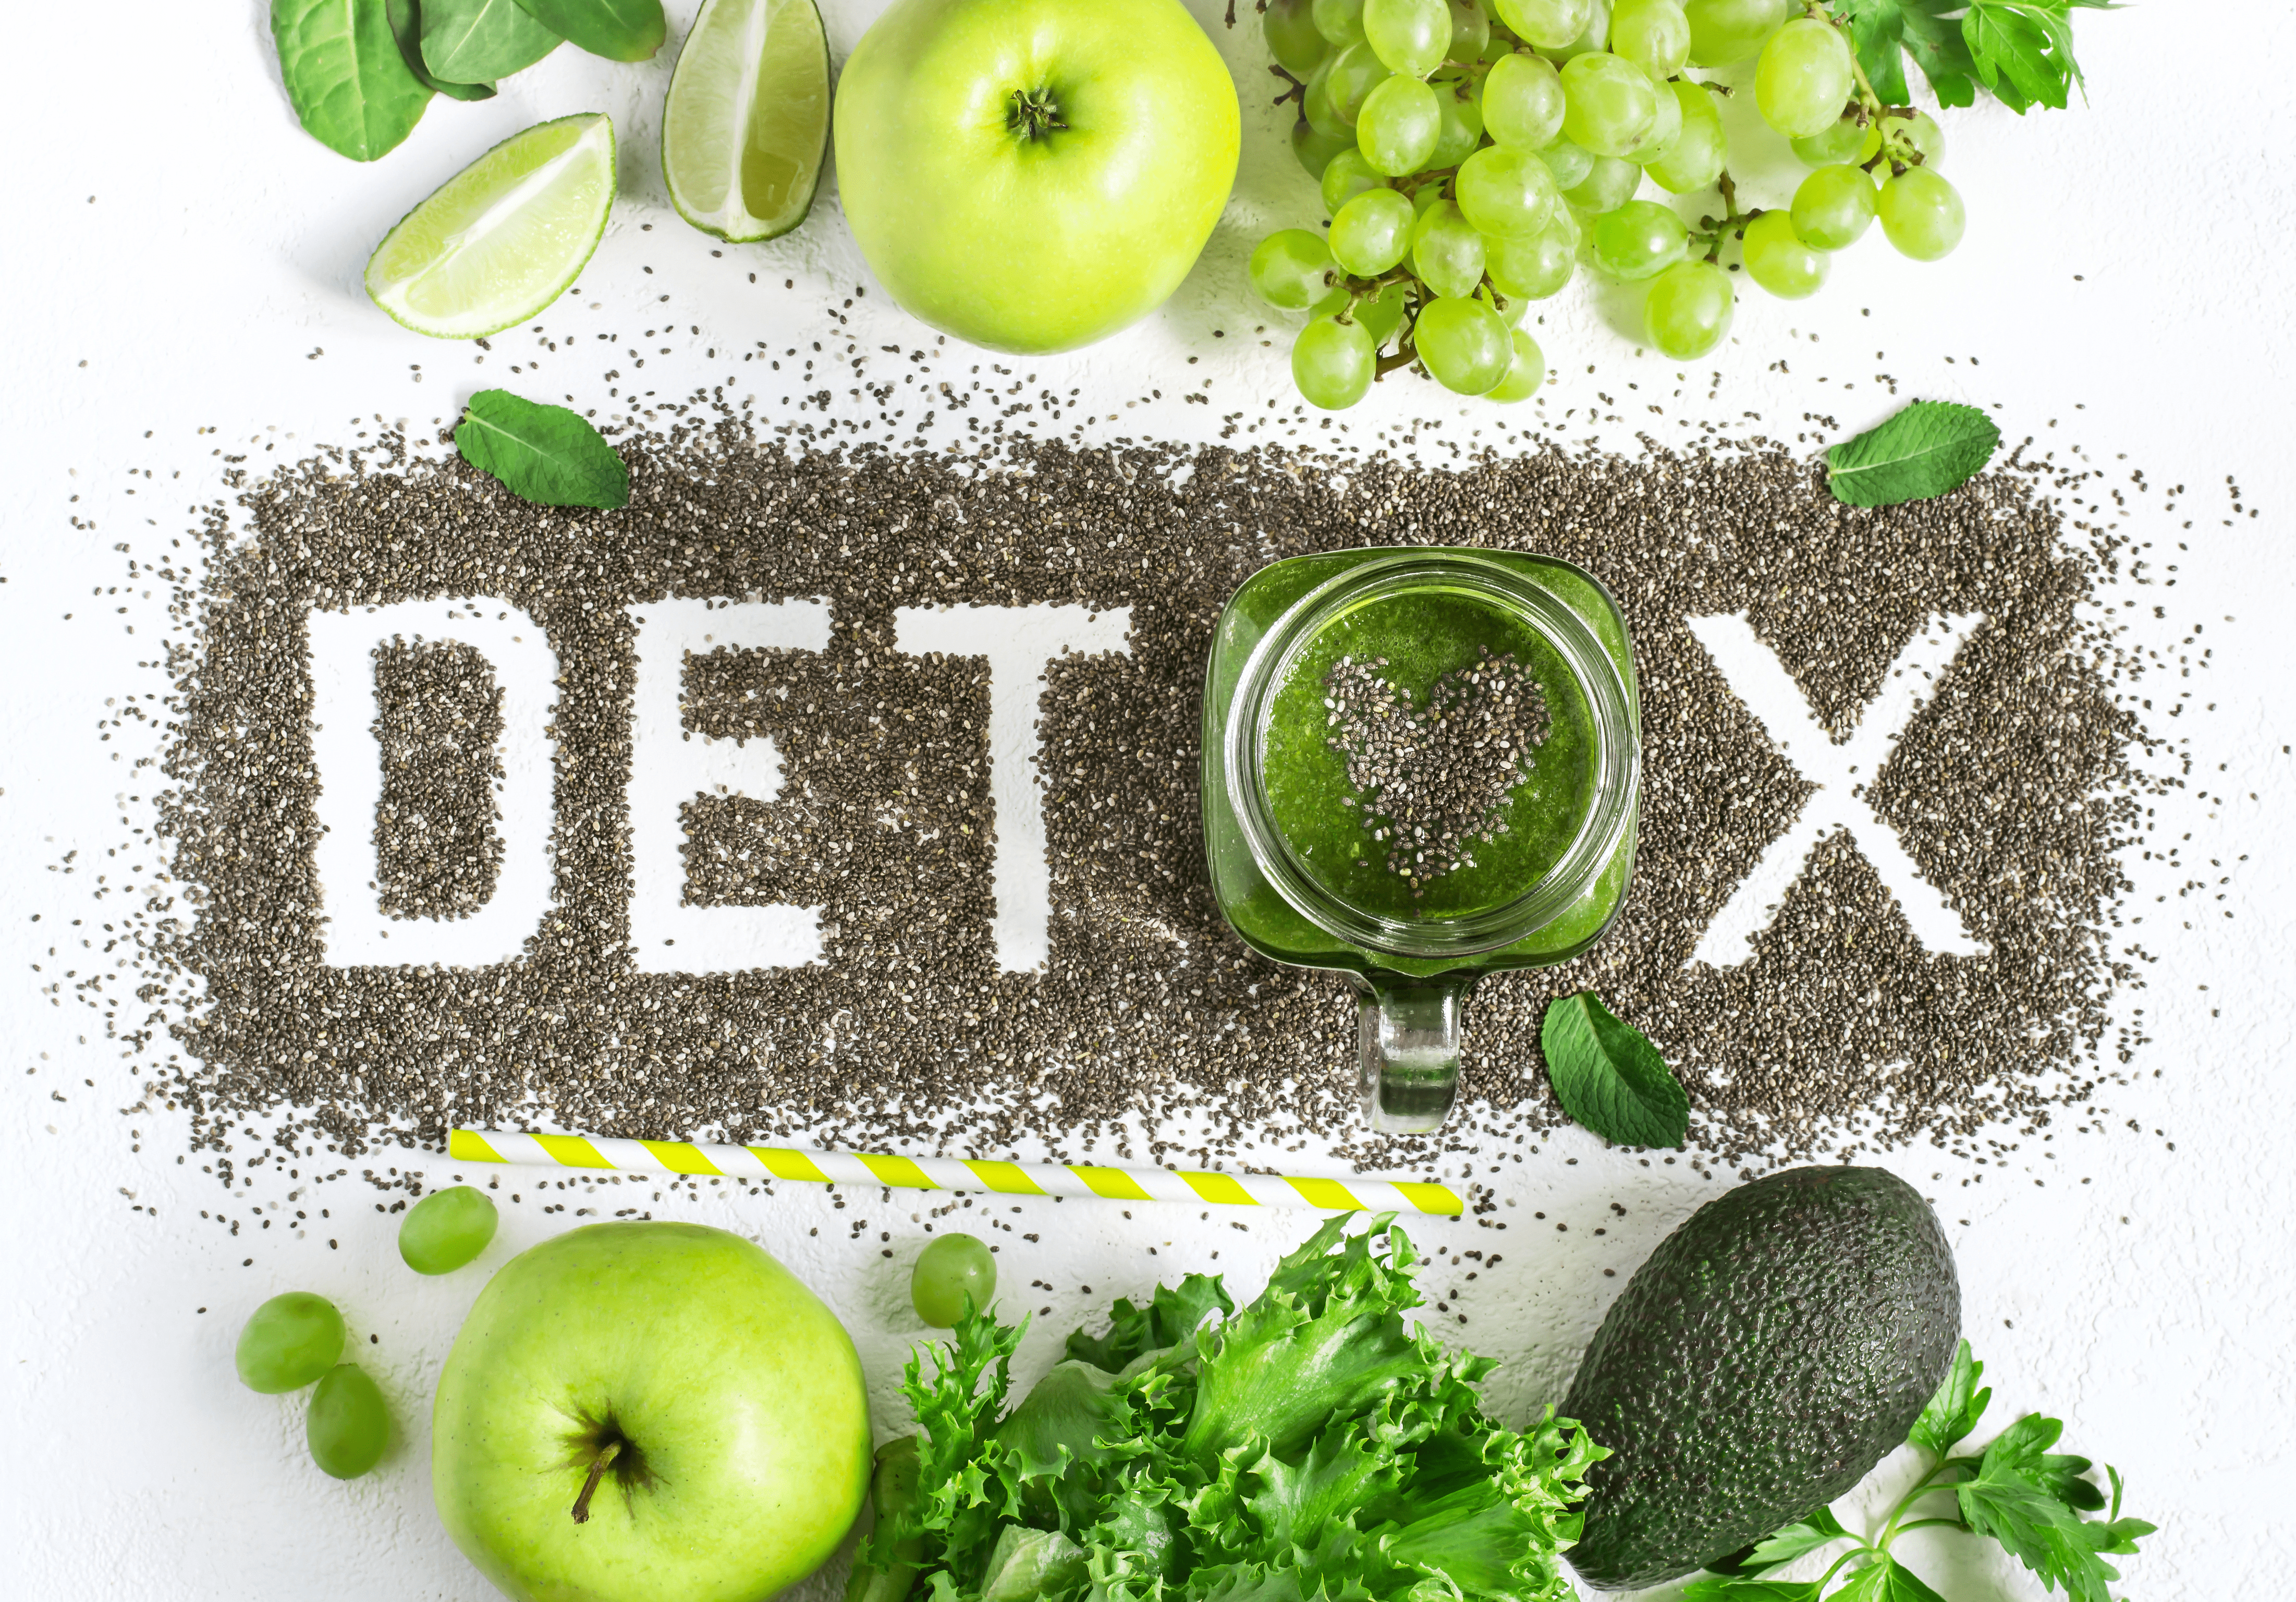 Rich results on Google’s SERP when searching for ‘Detox'